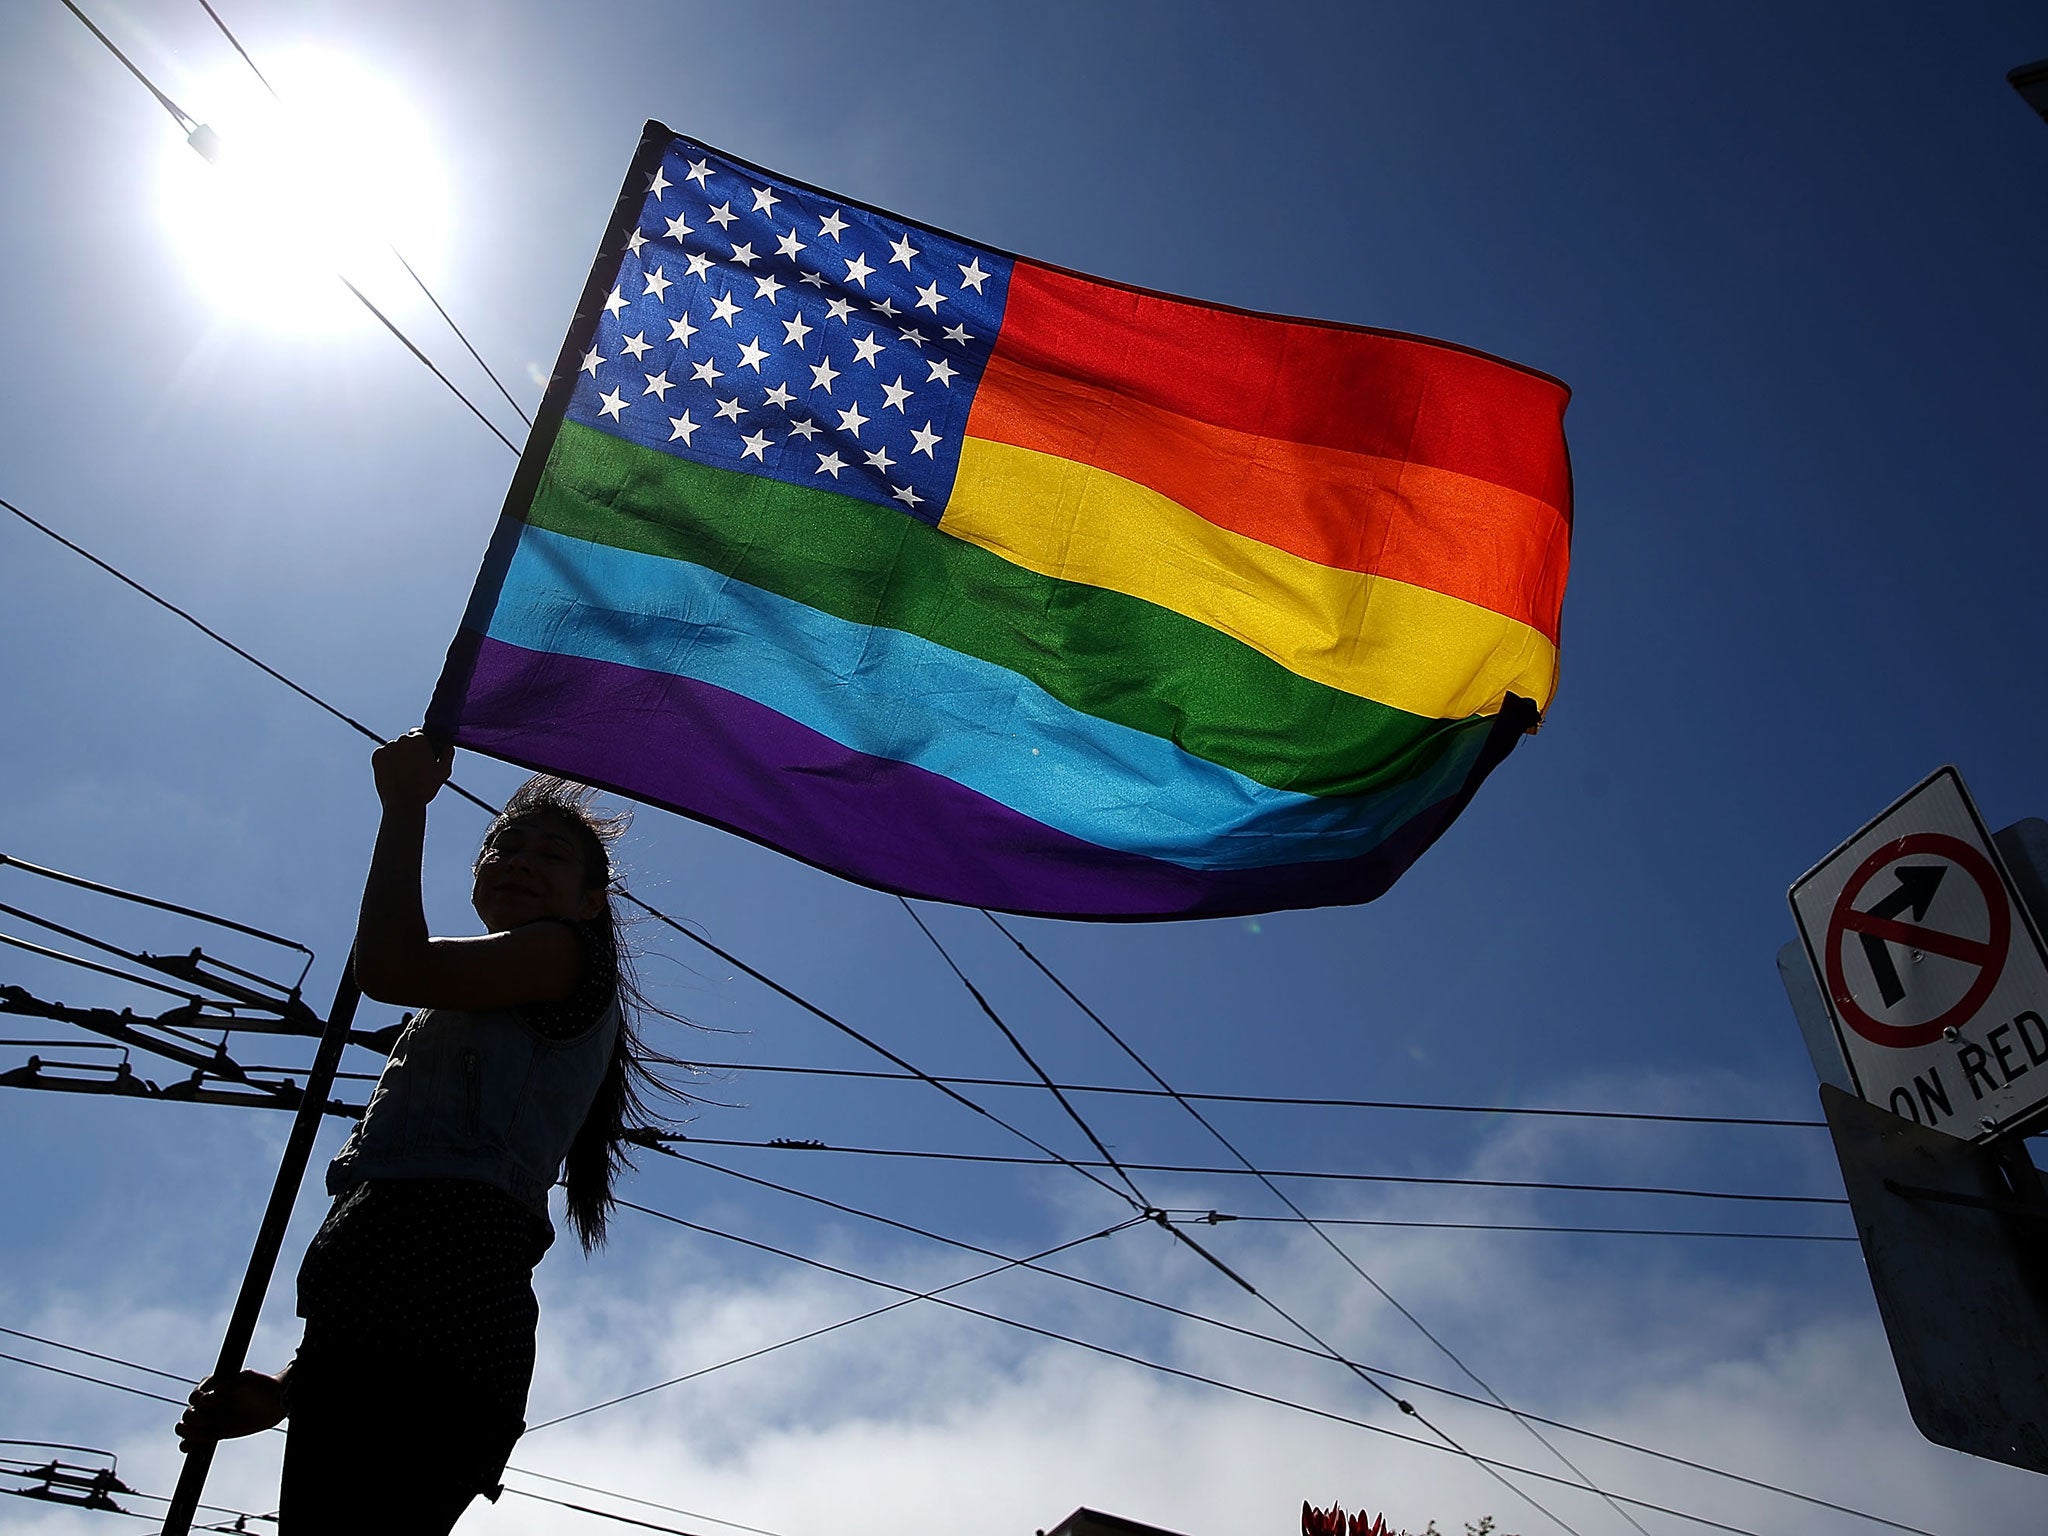 A same-sex marriage supporter waves a pride flag while celebrating the U.S Supreme Court ruling regarding same-sex marriage on June 26, 2015 in San Francisco, California